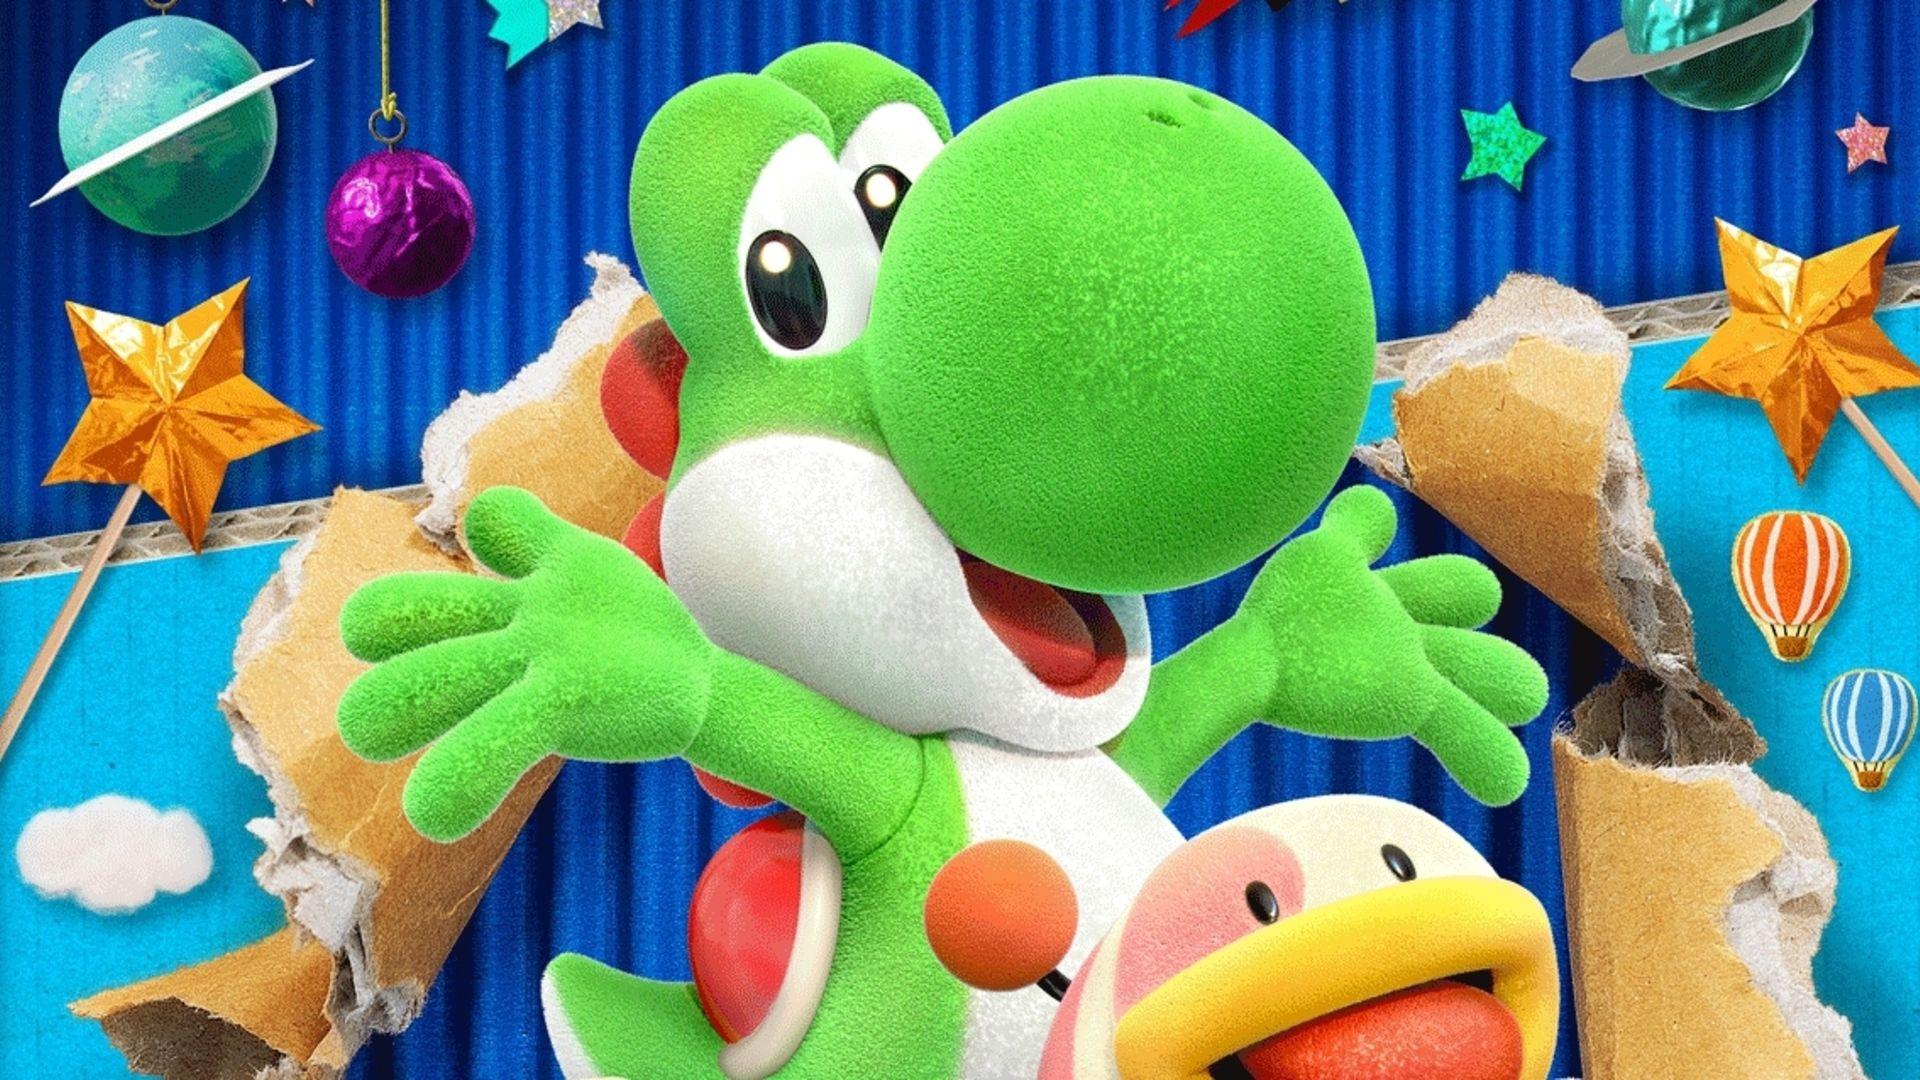 Yoshi's Crafted World, Kirby's Extra Epic Yarn get March release